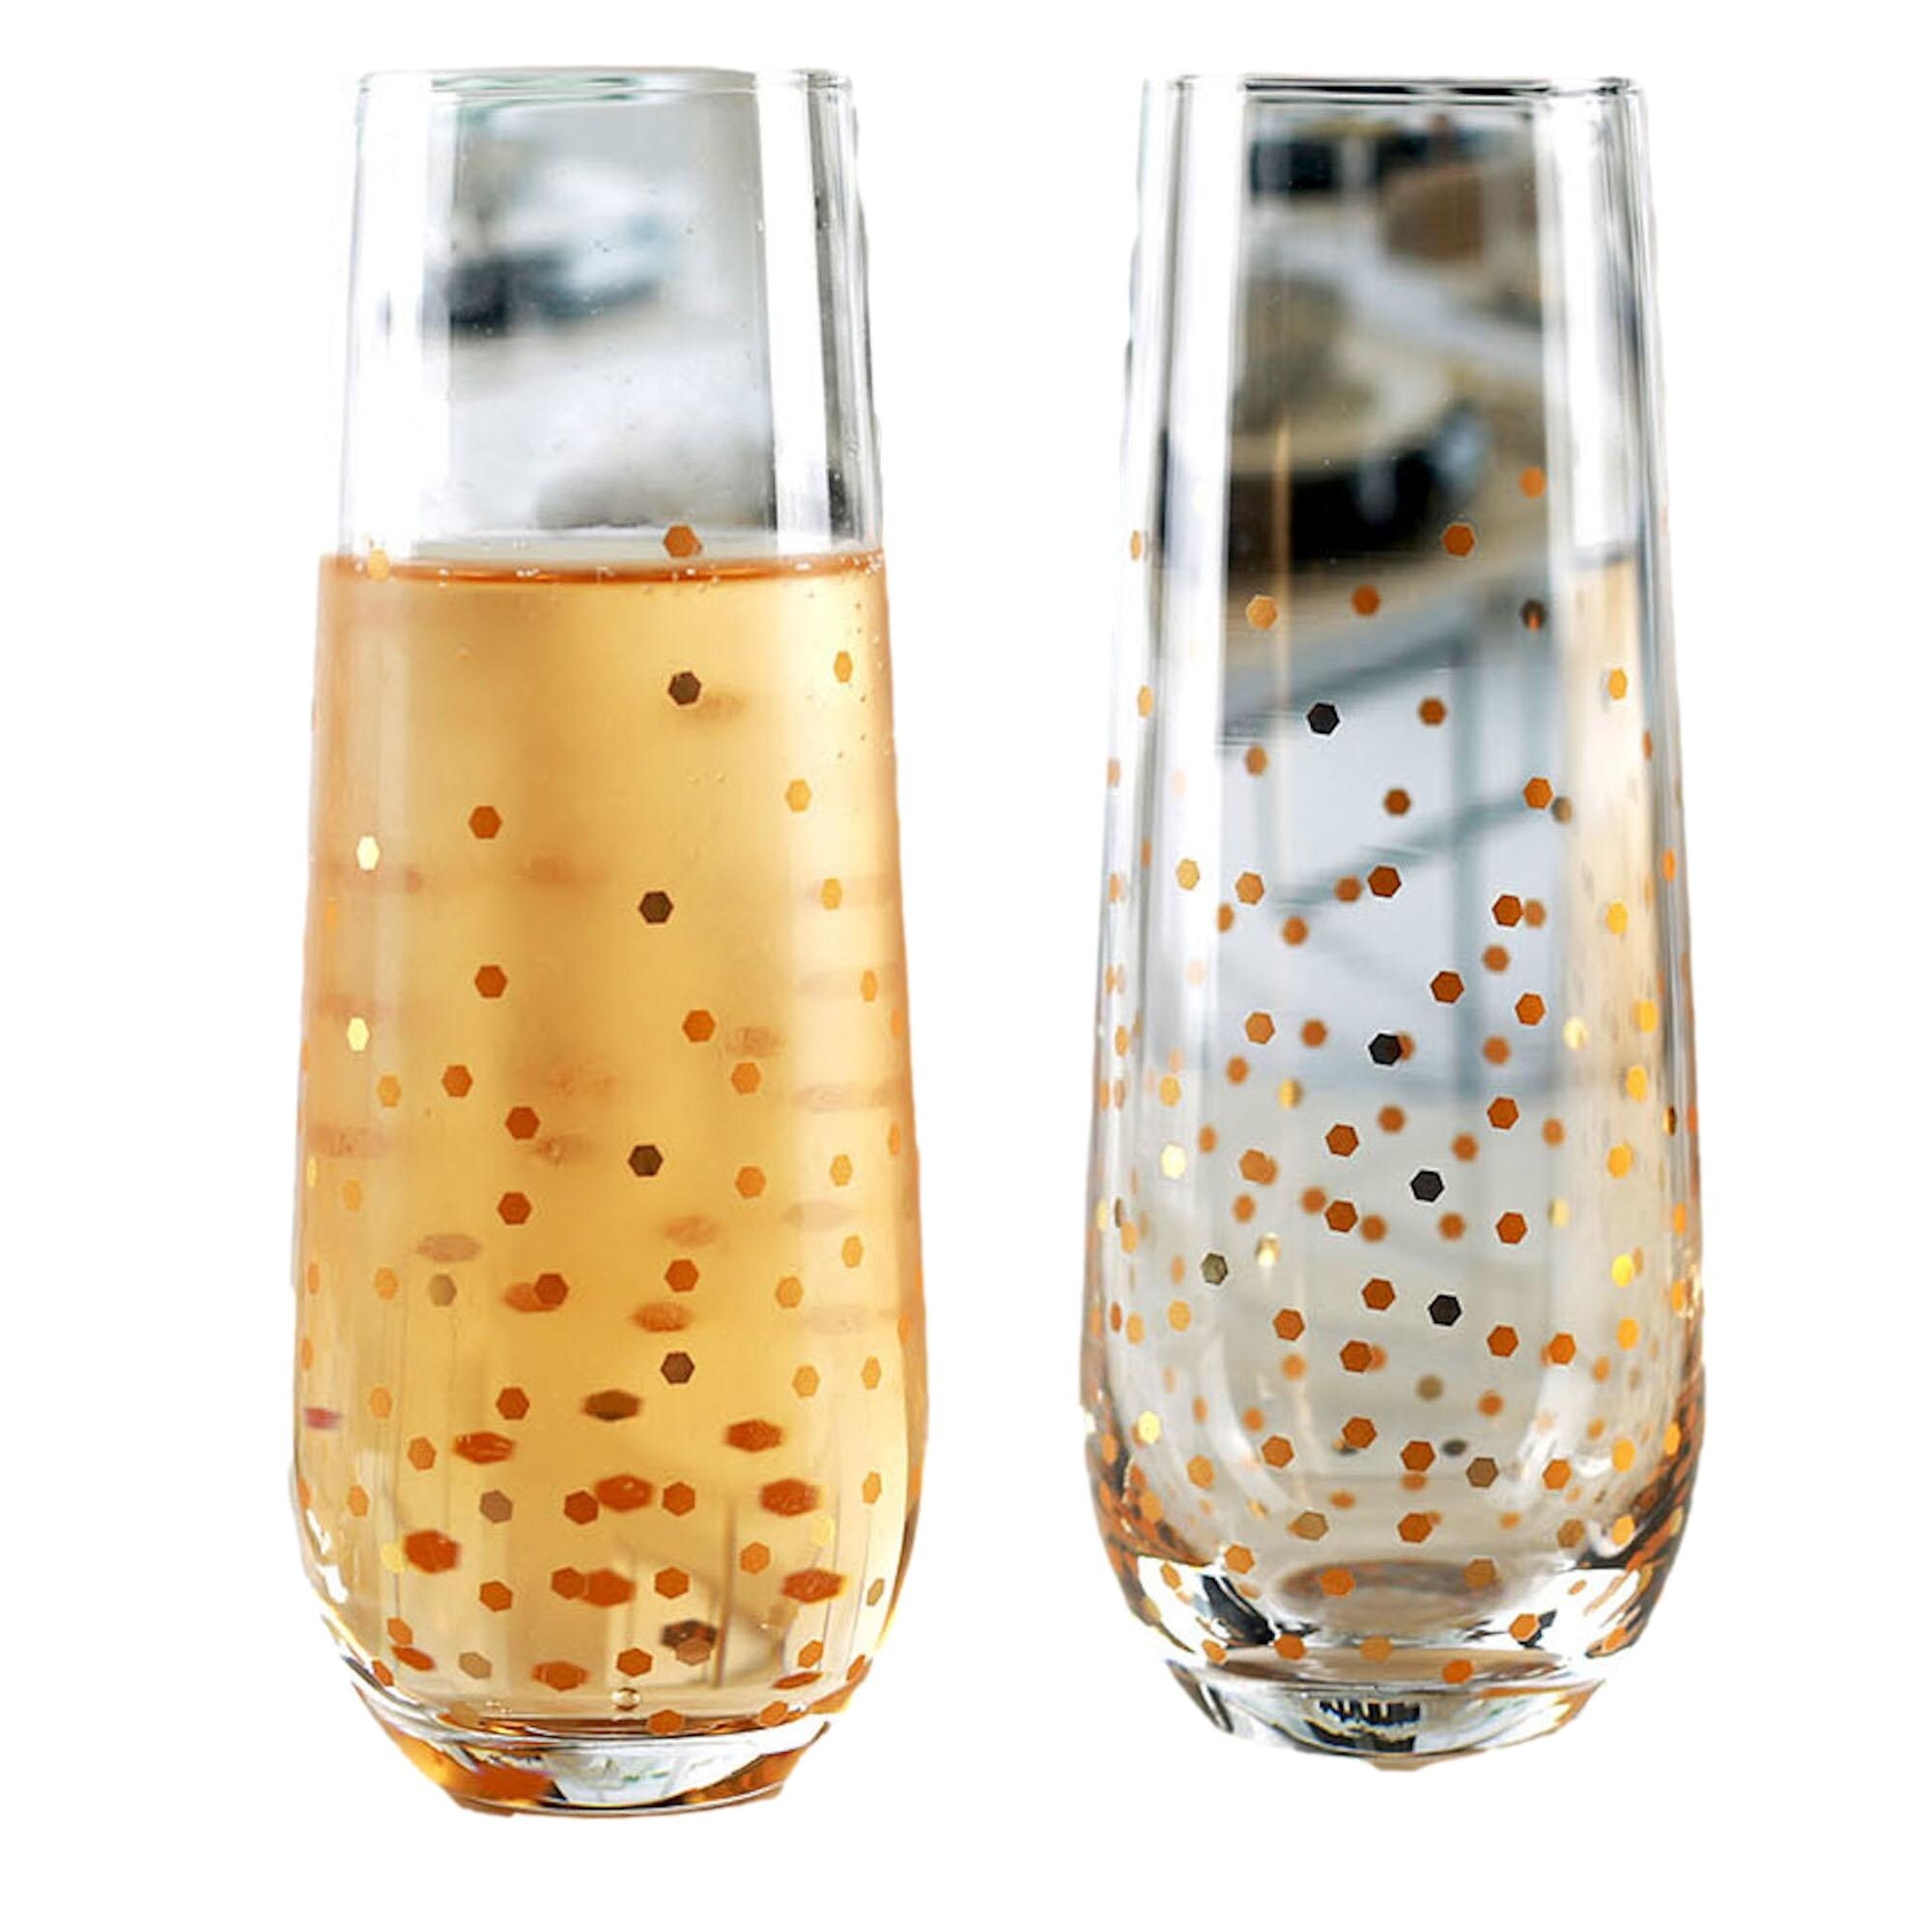 https://ak1.ostkcdn.com/images/products/is/images/direct/be435641e80c526b65aa307d068bcbb7d8fbacfd/Circleware-Stemless-Flute-with-Gold-Confetti-Decal-Set-of-2-10.5oz.jpg